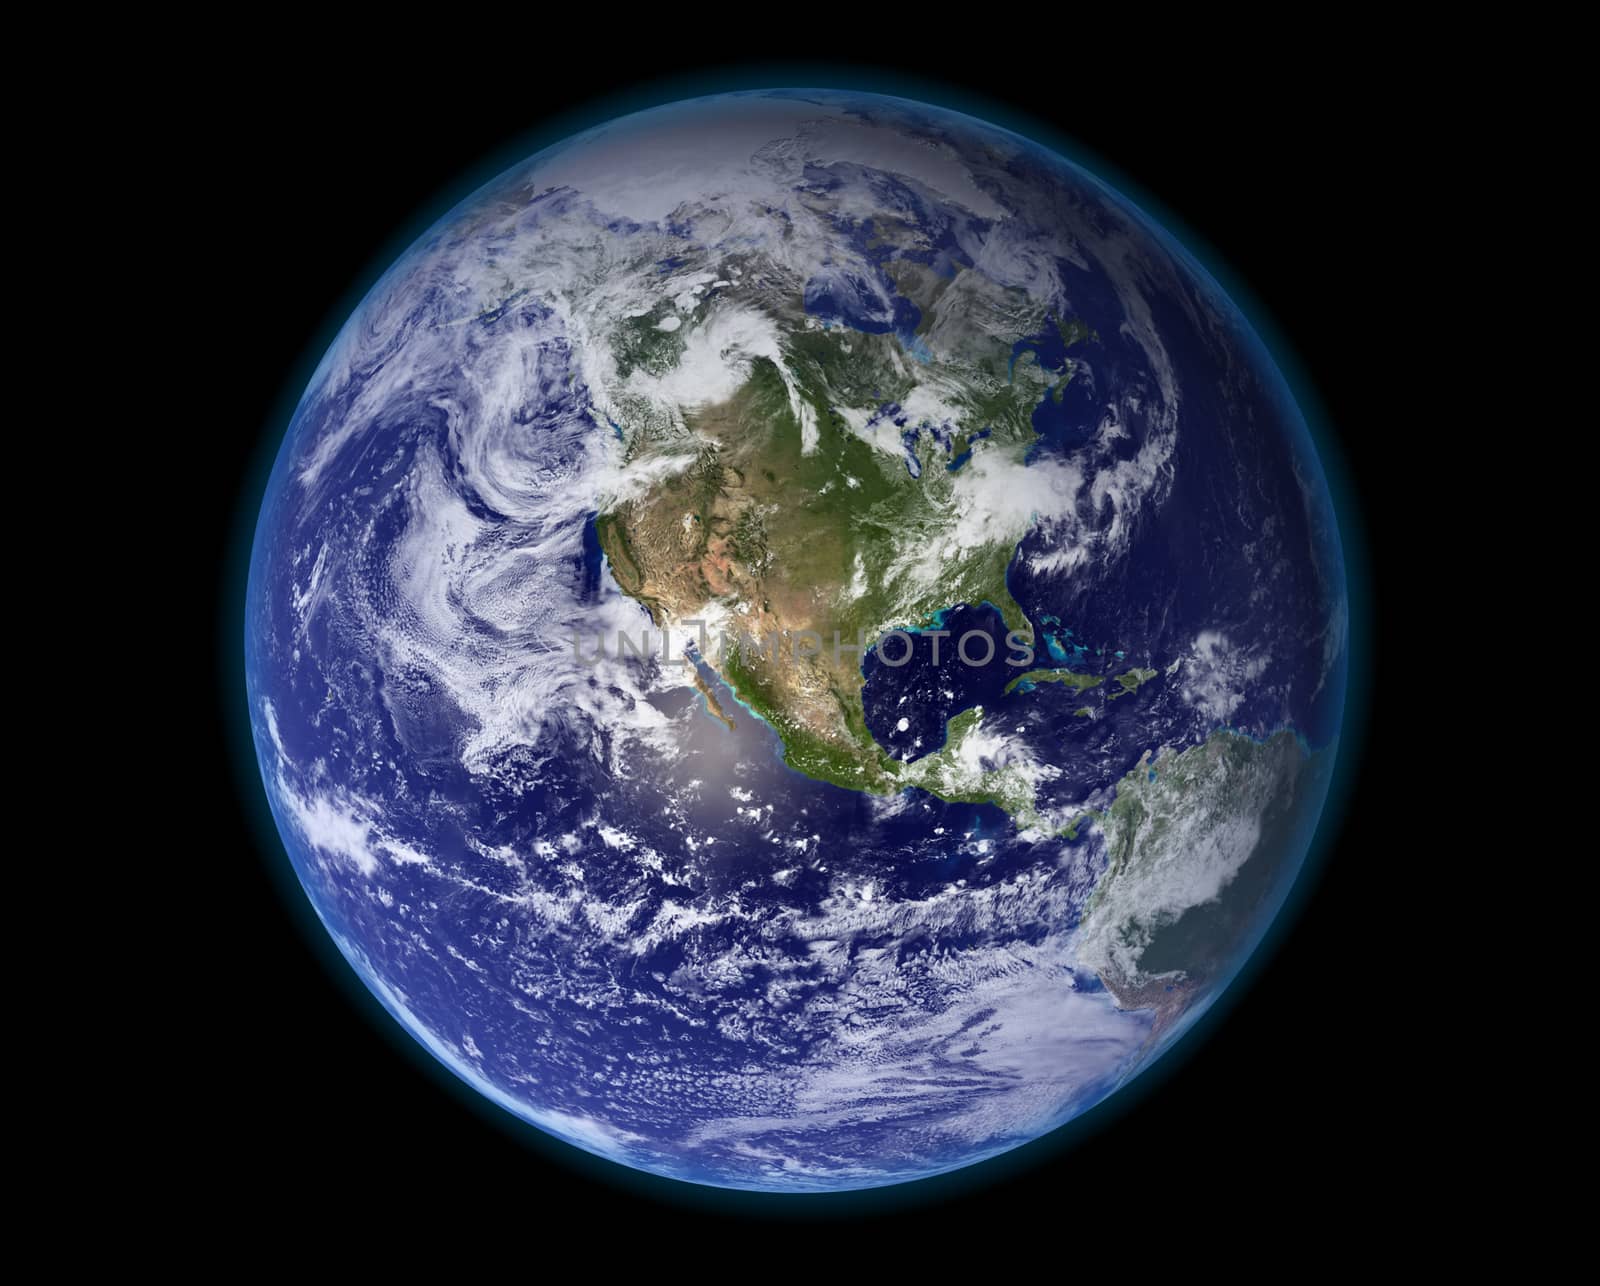 Earth west model isolated over black background with clipping path.
Original world map texture used from http://visibleearth.nasa.gov